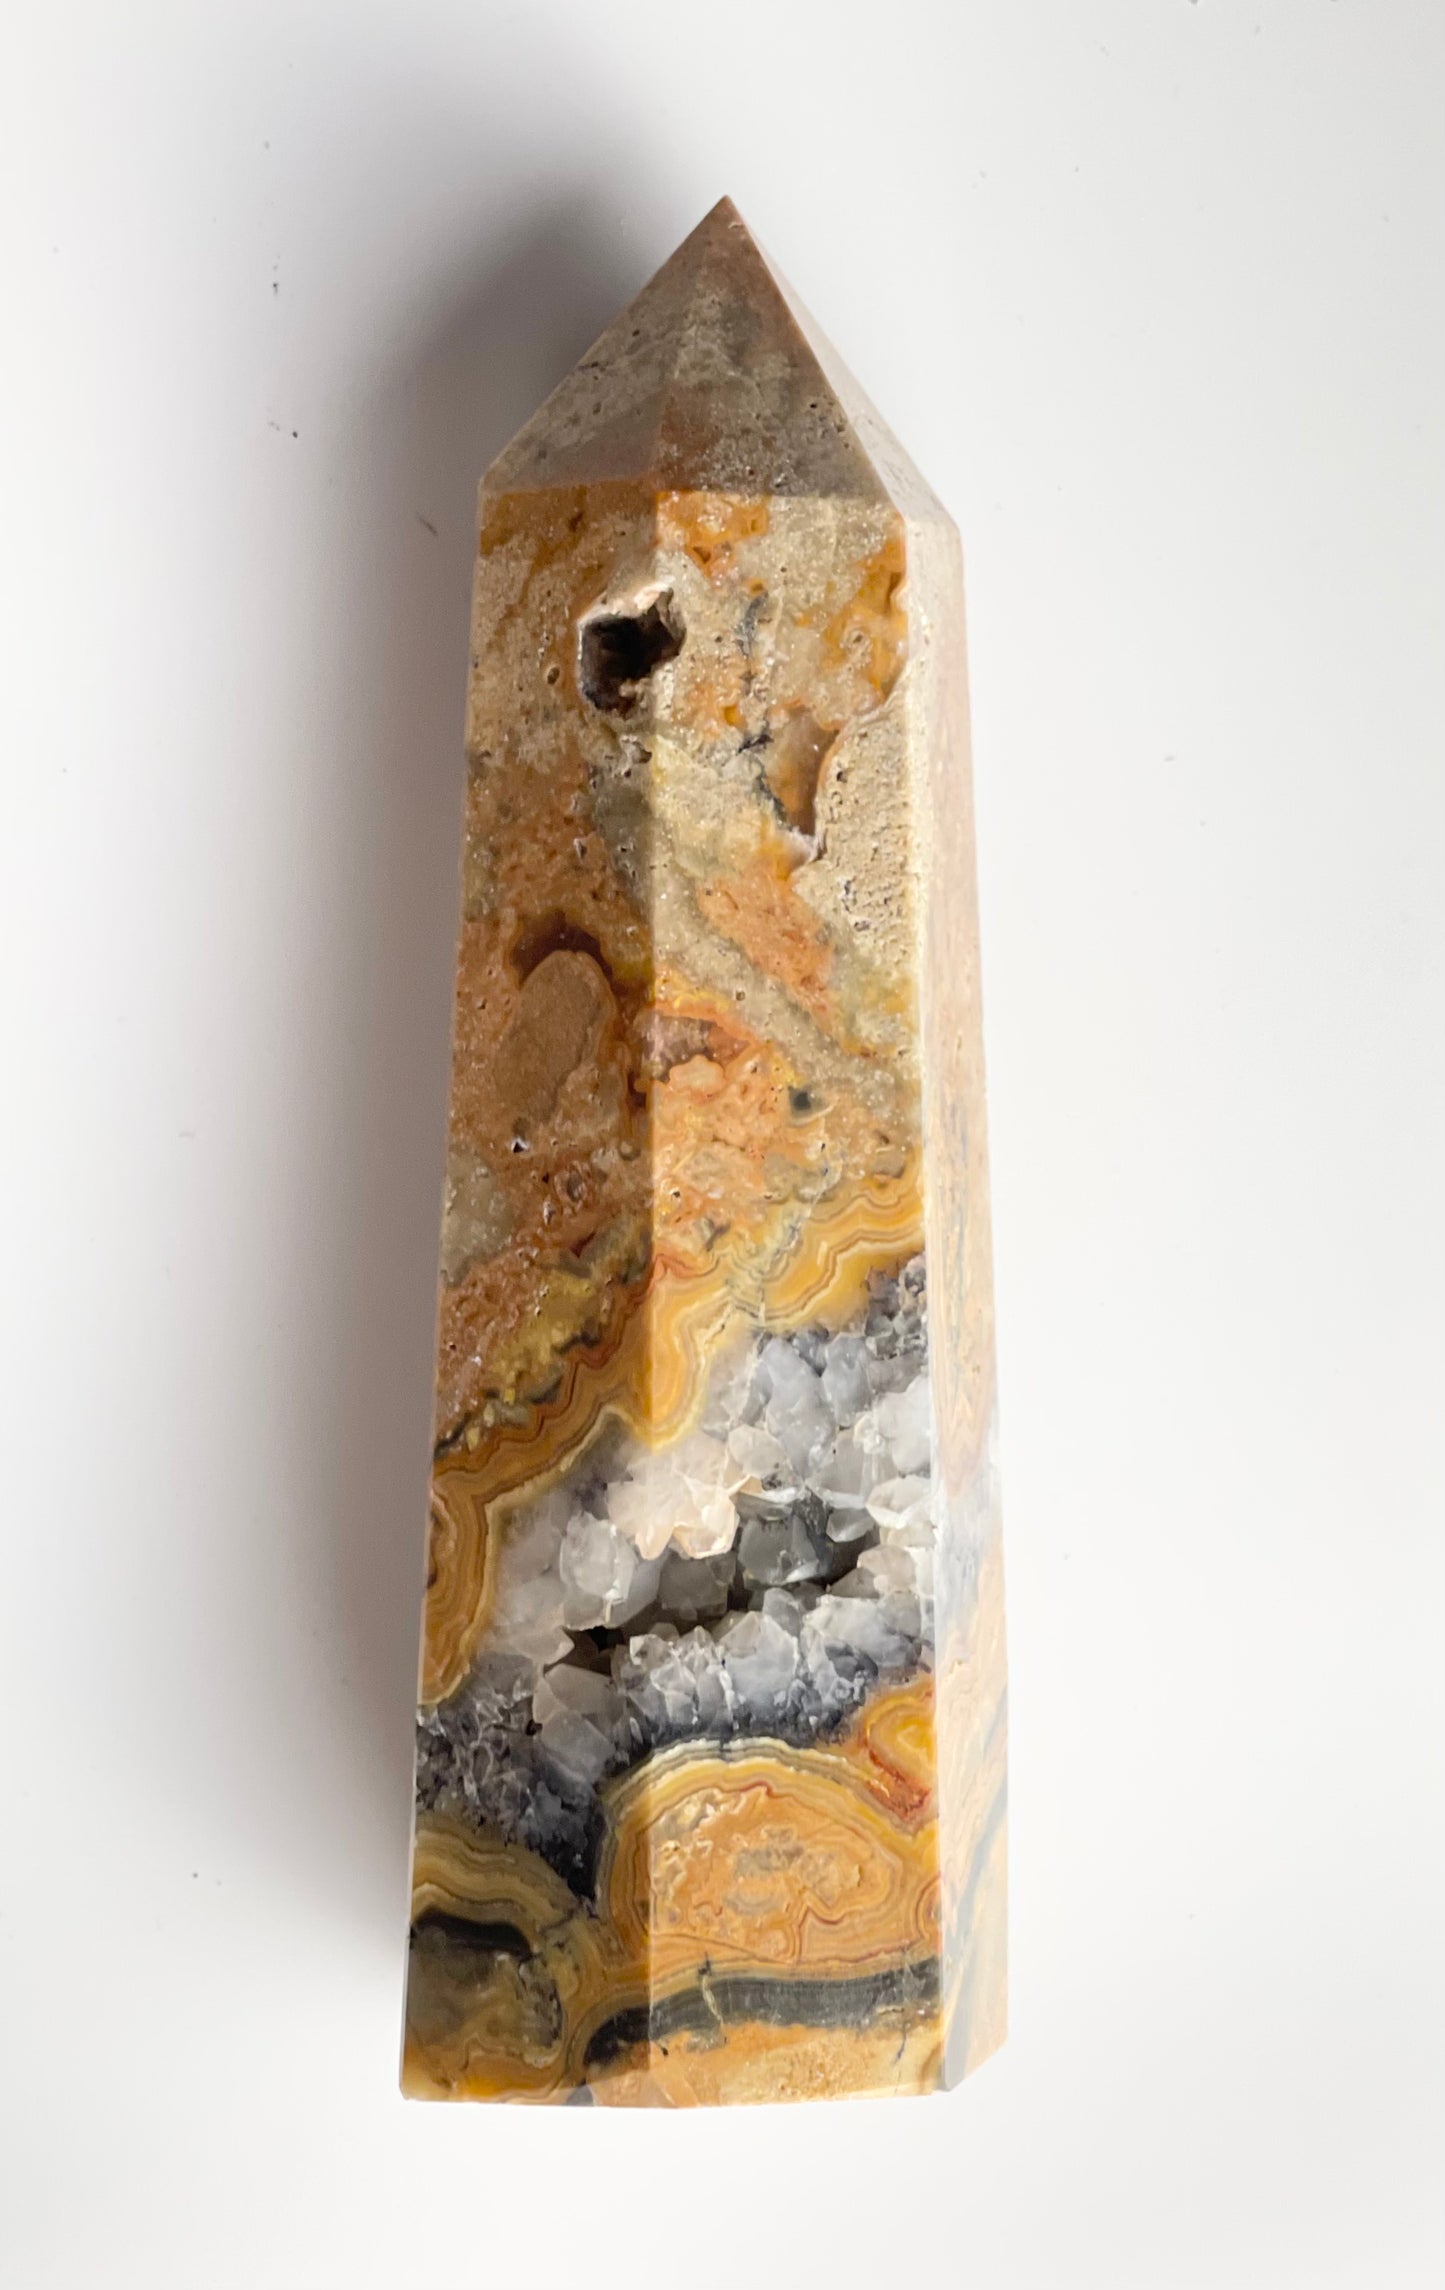 Crazy lace agate towers and slab crystals